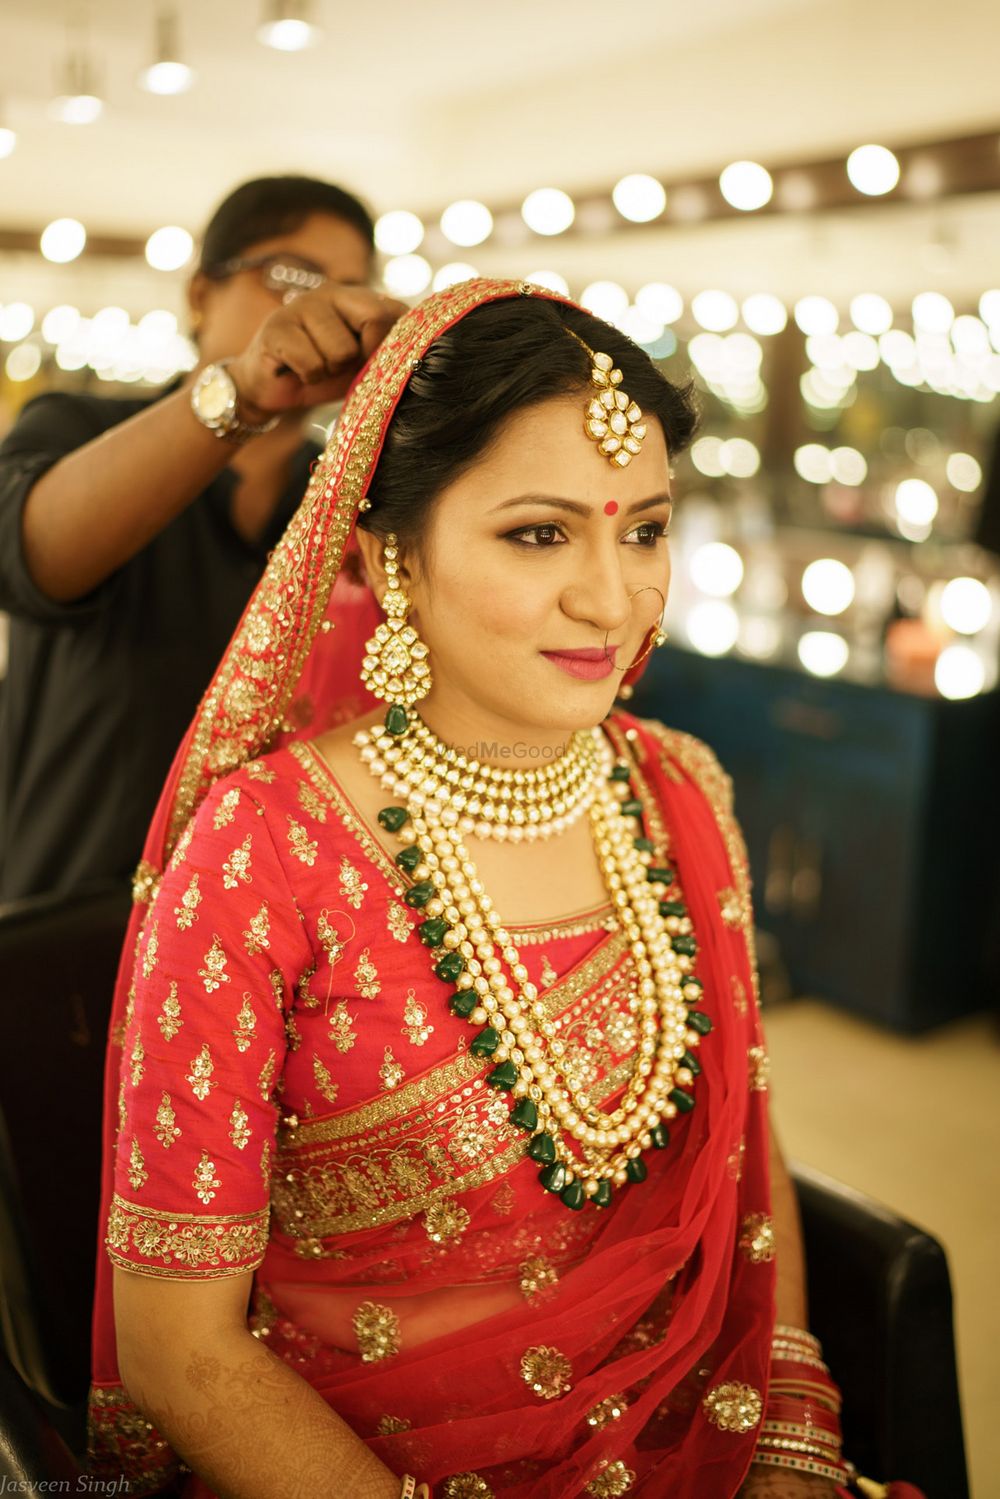 Photo of Contrasting green and gold jewellery with red bridal lehenga